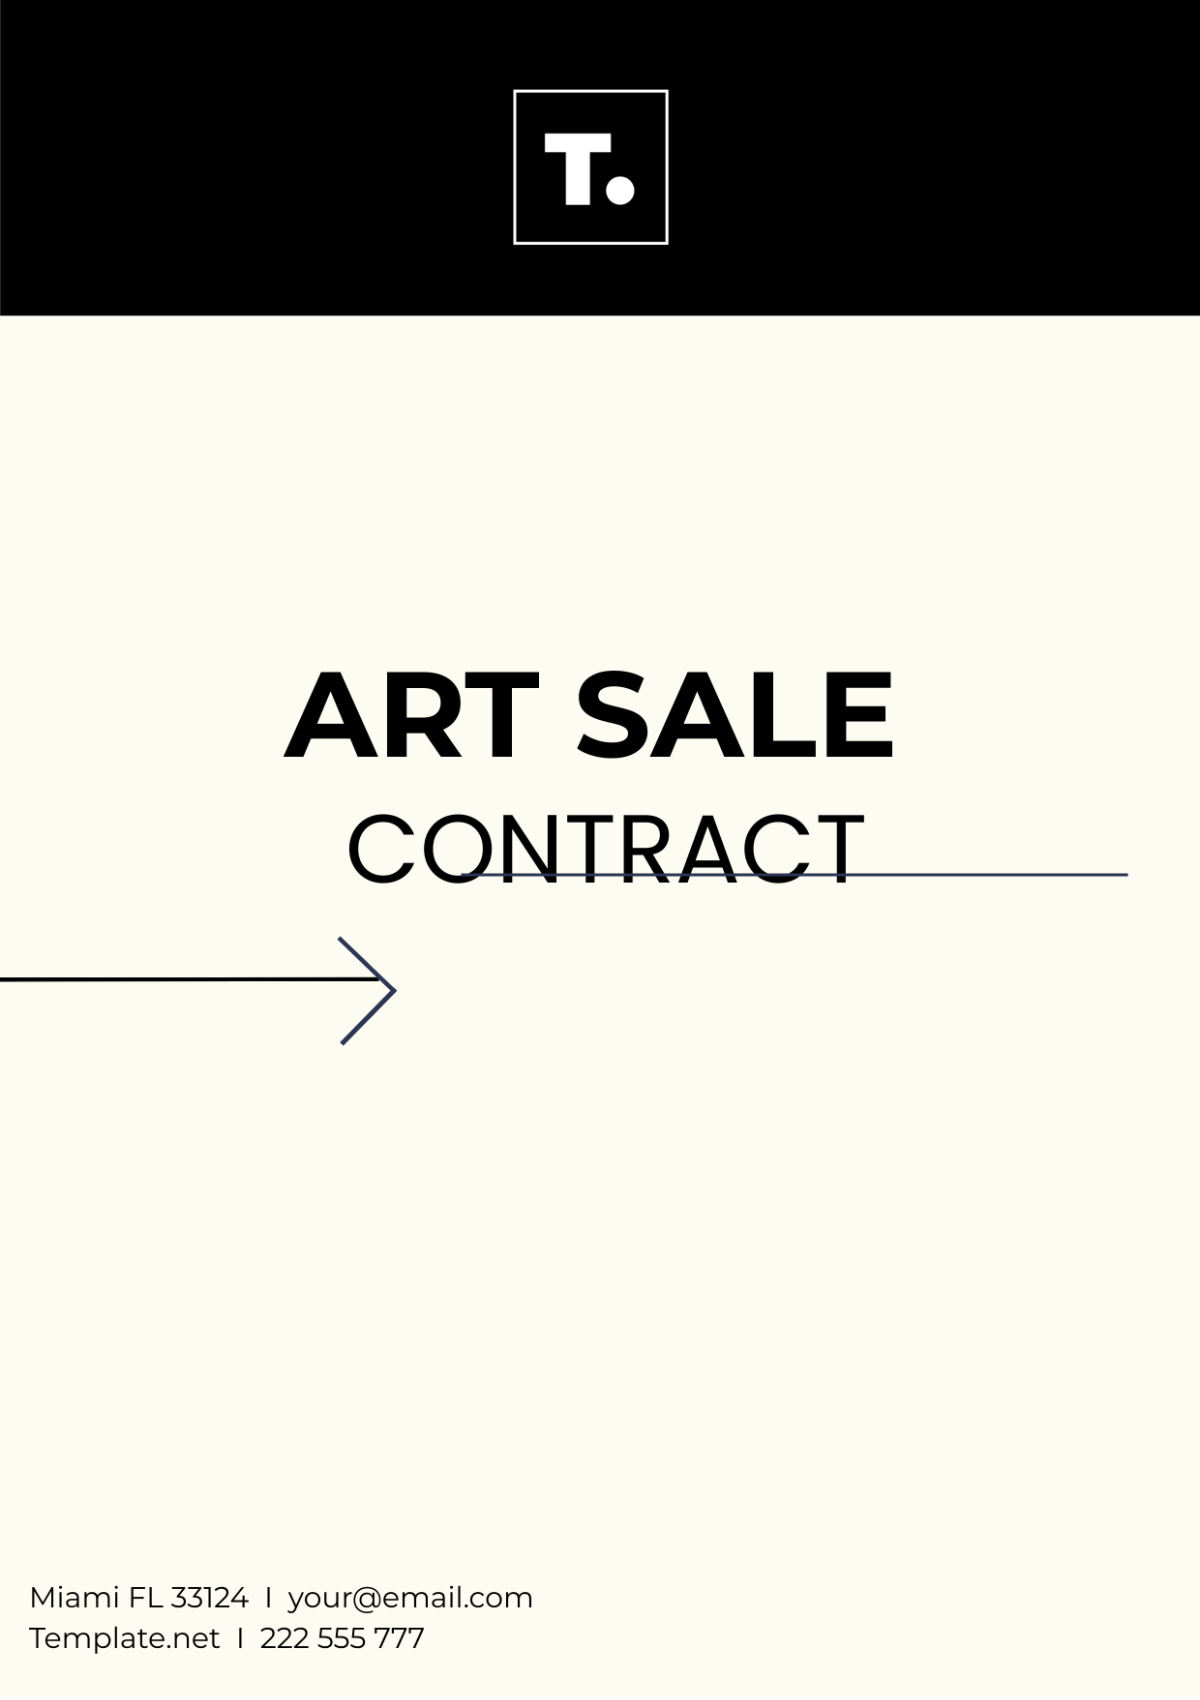 Free Art Sale Contract Template